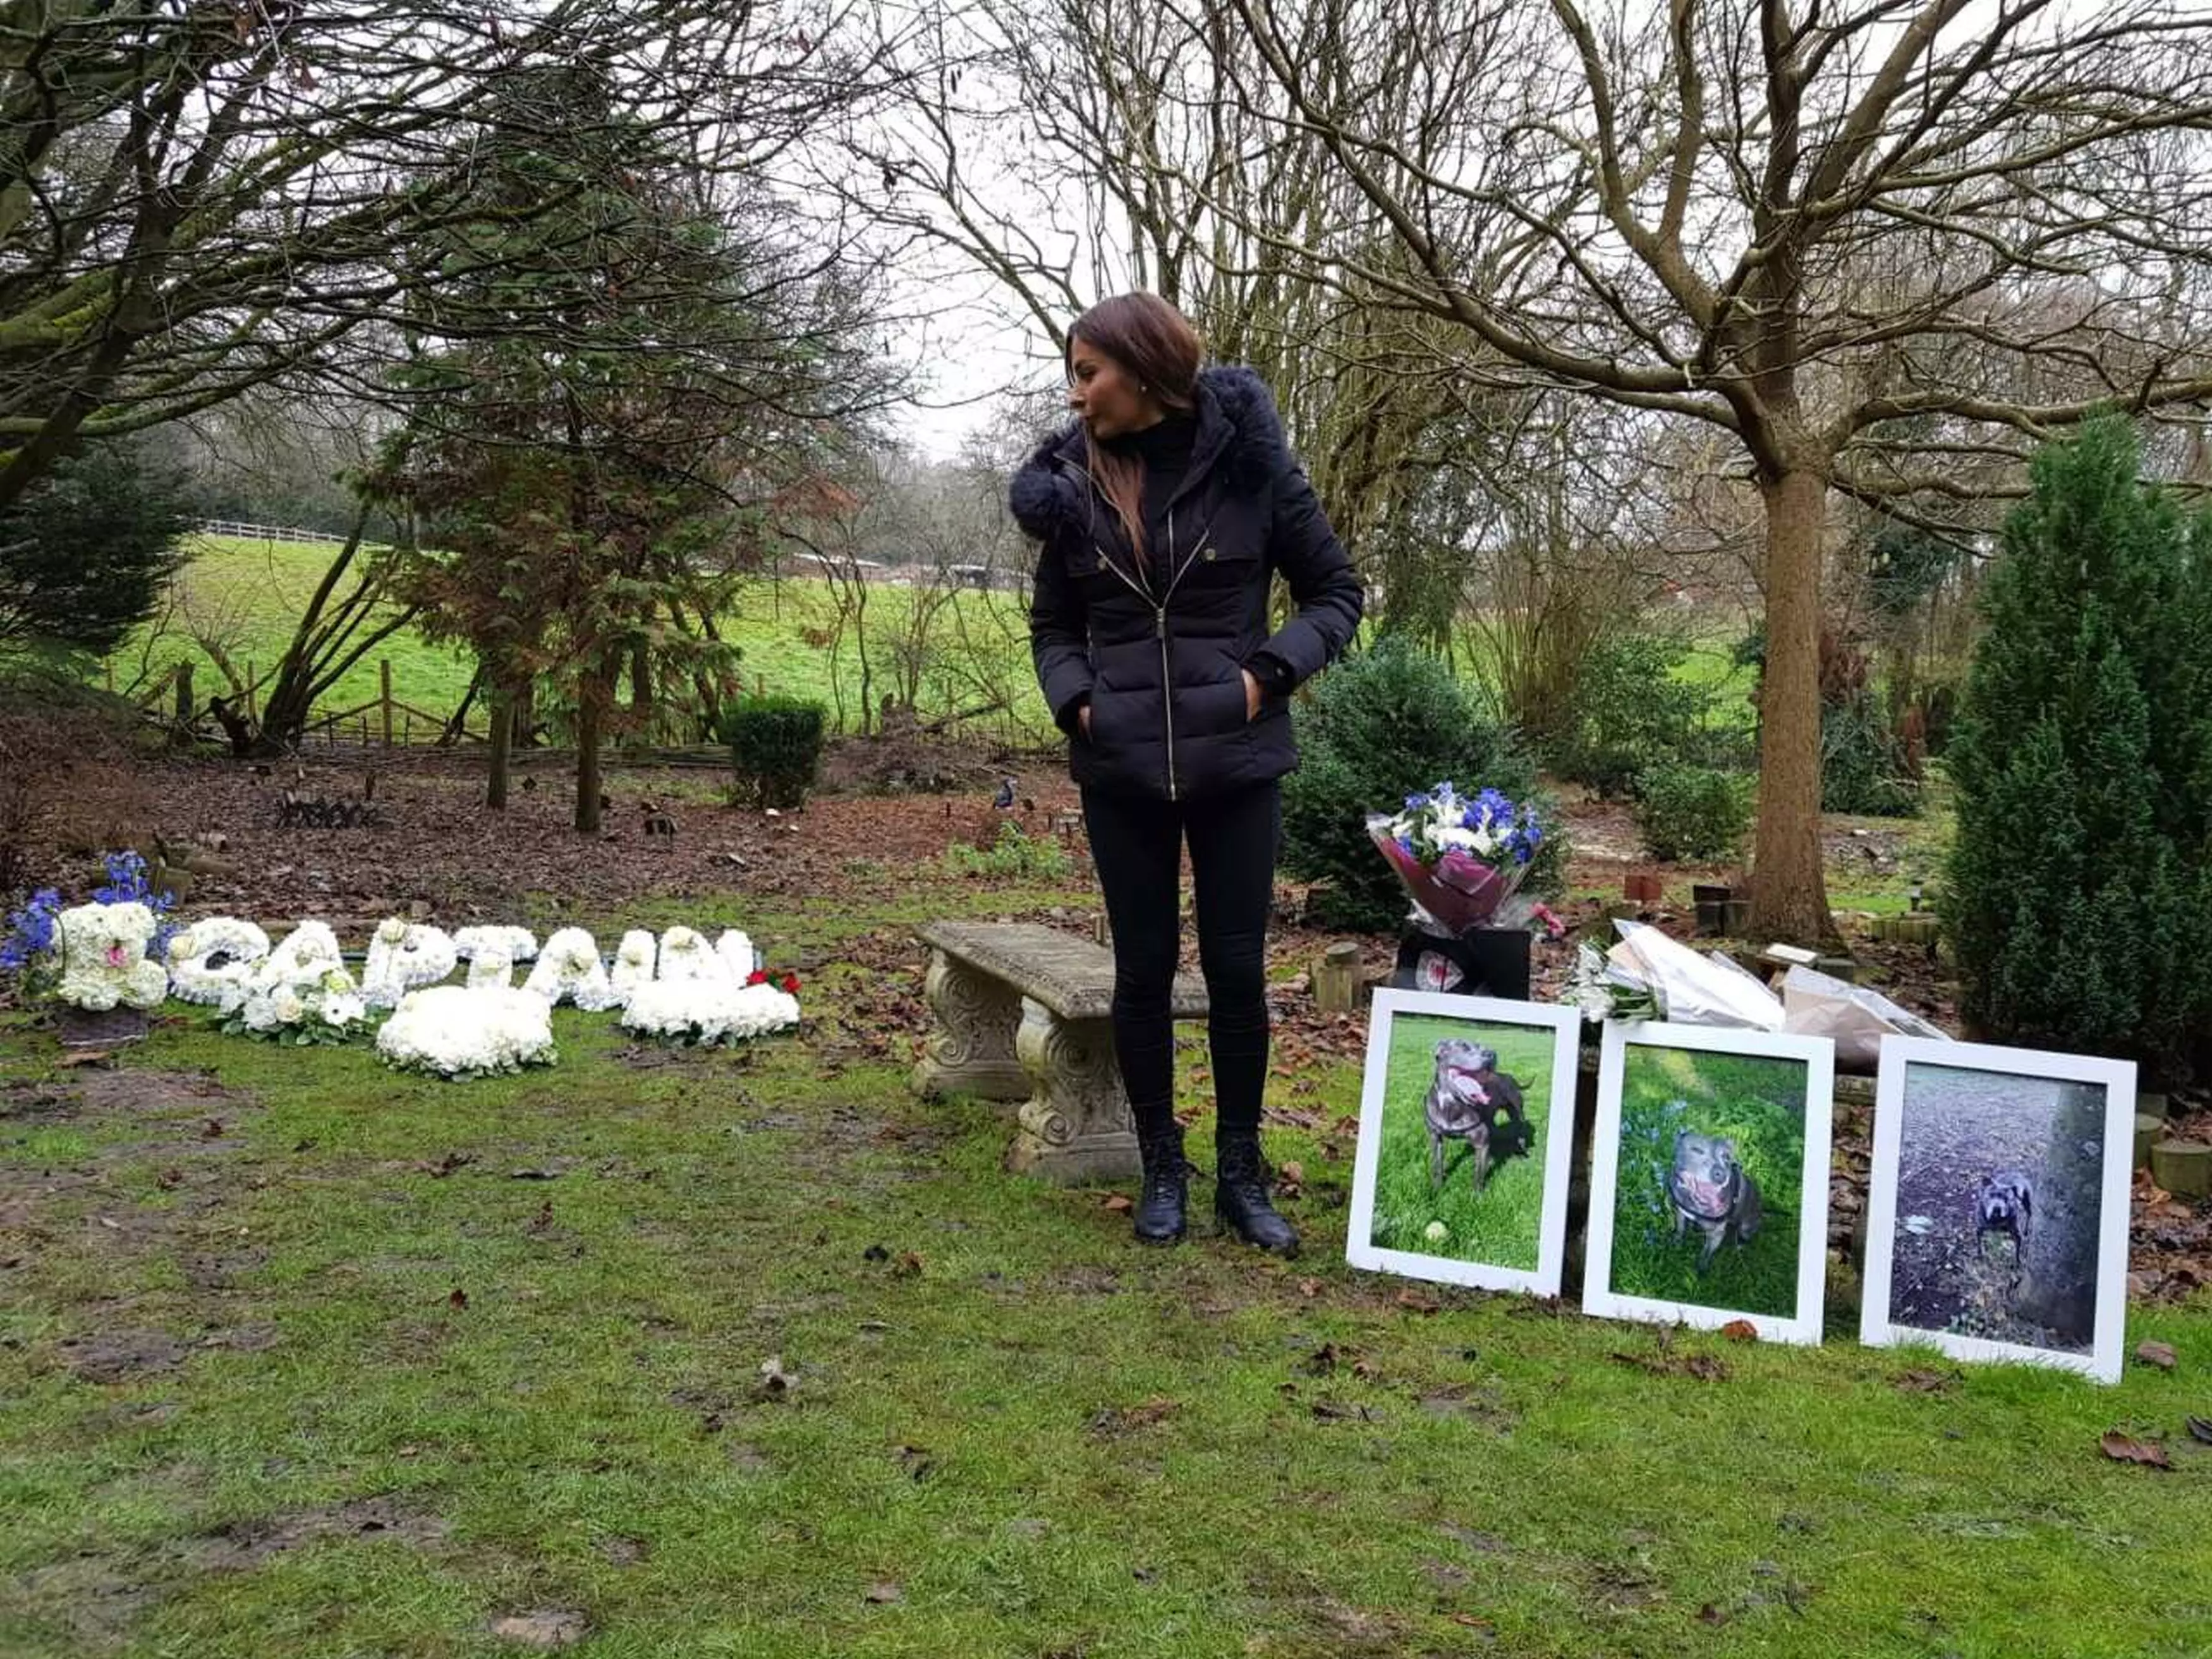 Sasha Smajic looks at the floral tributes at the pet cemetery.